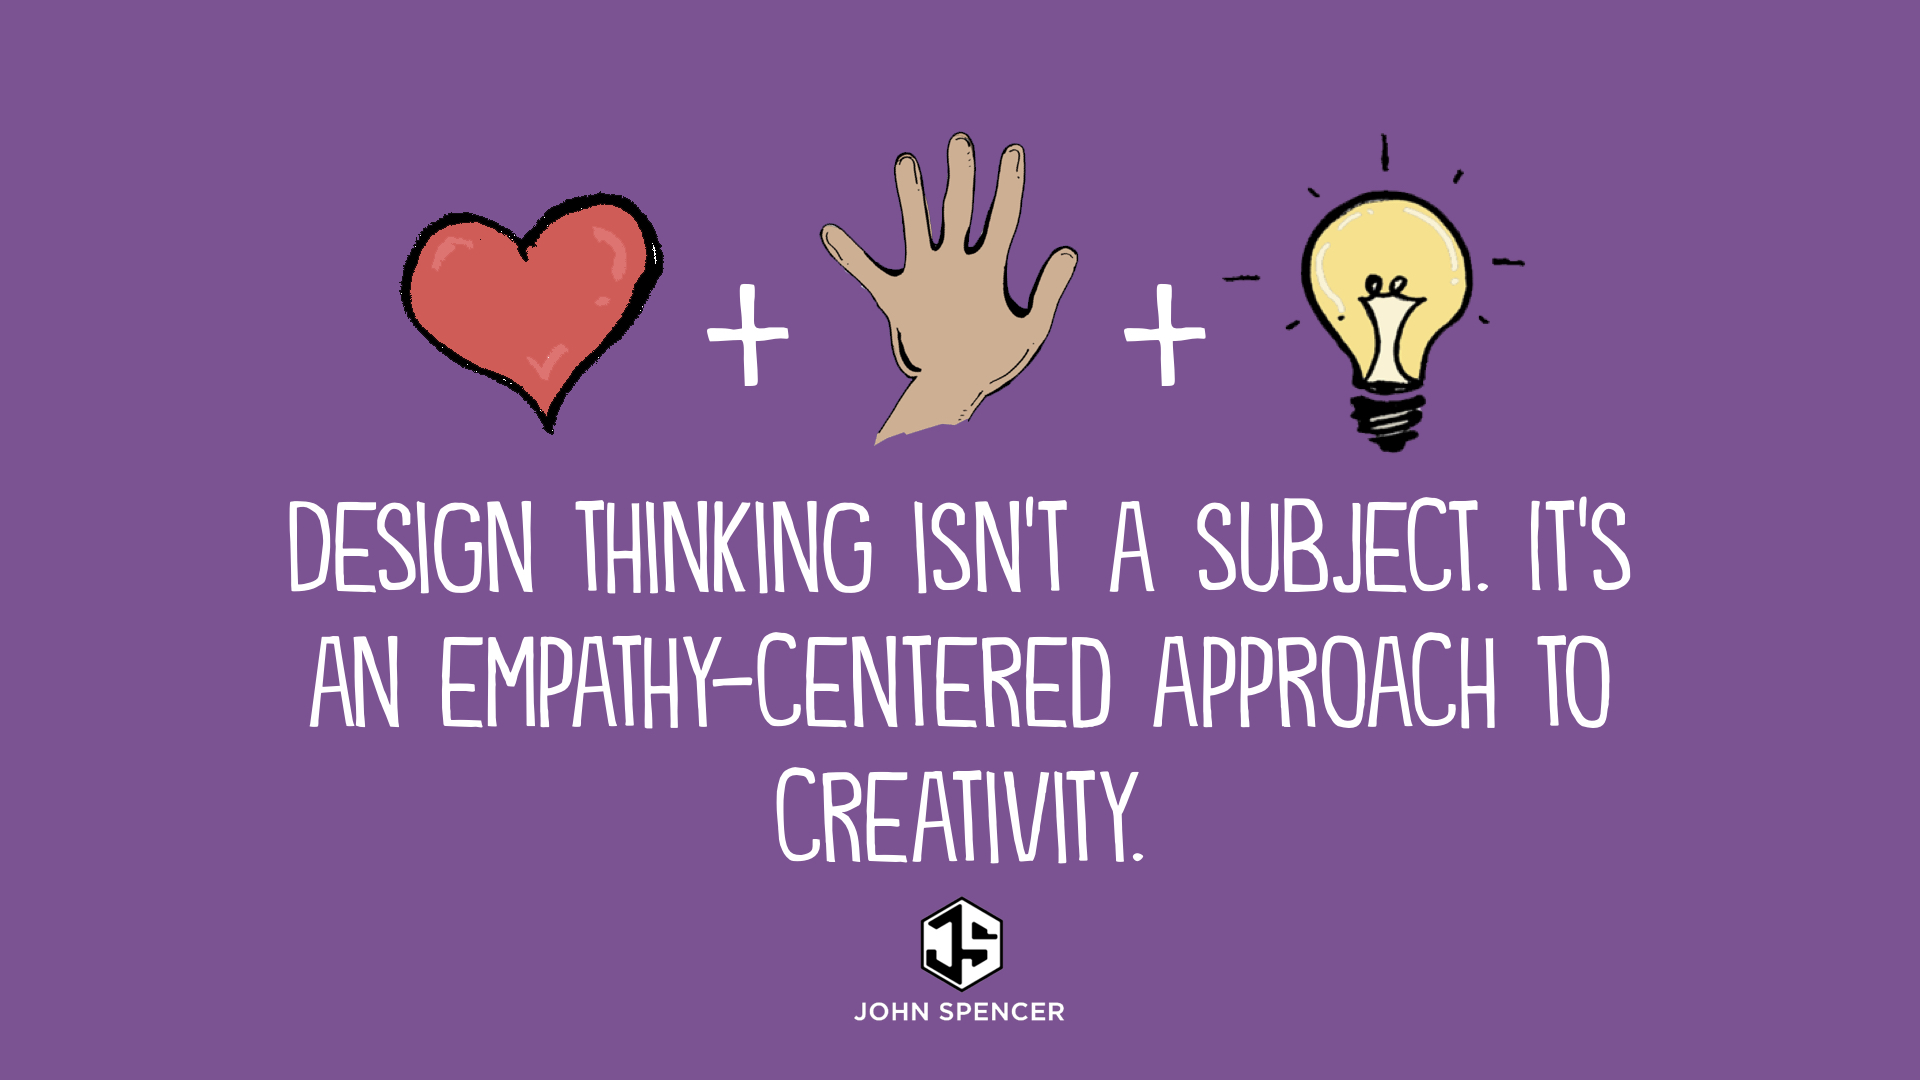 Design thinking isn't a subject. It's an empathy-centered approach to creativity. 
icons of heart + hand + lightbulb